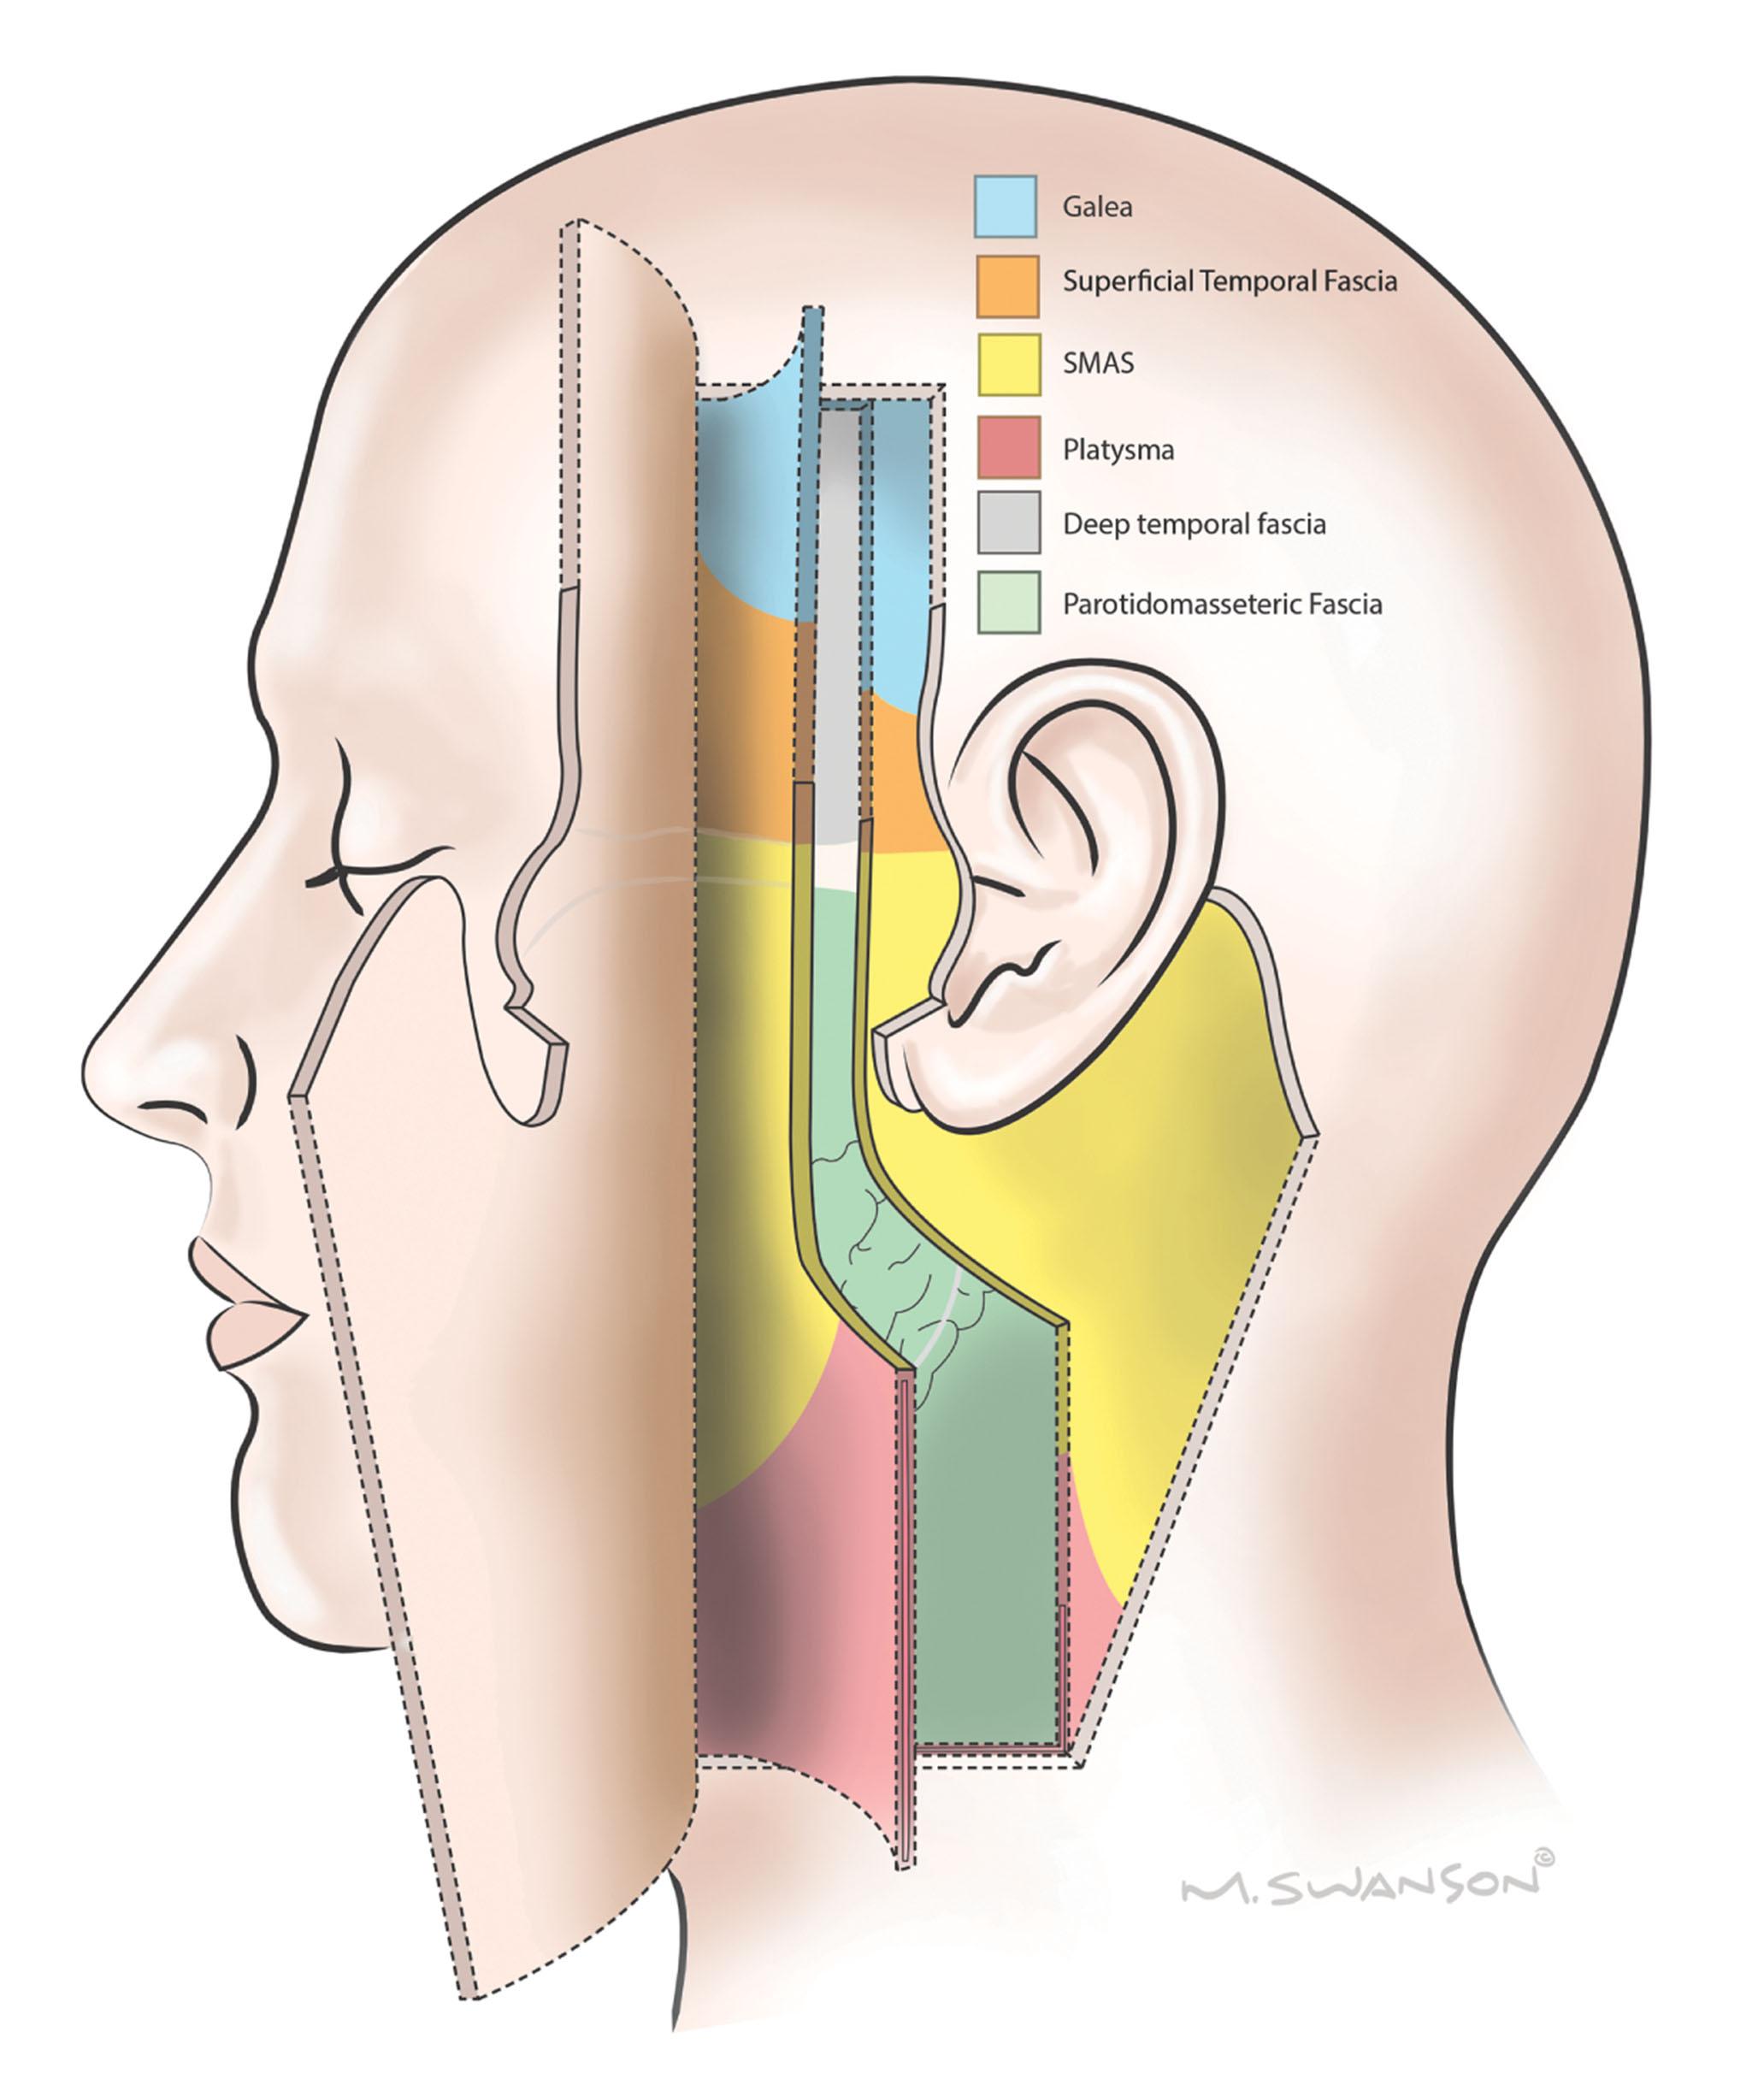 Figure 9.3.2, The face is composed of concentric layers of soft tissue. The most superficial layer is skin and subcutaneous fat – elevated in this image. Next is the superficial musculo-aponeurotic system (SMAS) , which is contiguous with the platysma inferiorly and with the superficial temporal fascia (temporoparietal fascia) and galea superiorly. Deep to the superficial fascia is the parotidomasseteric fascia, contiguous with the deep cervical fascia inferiorly and the deep temporal fascia superiorly.